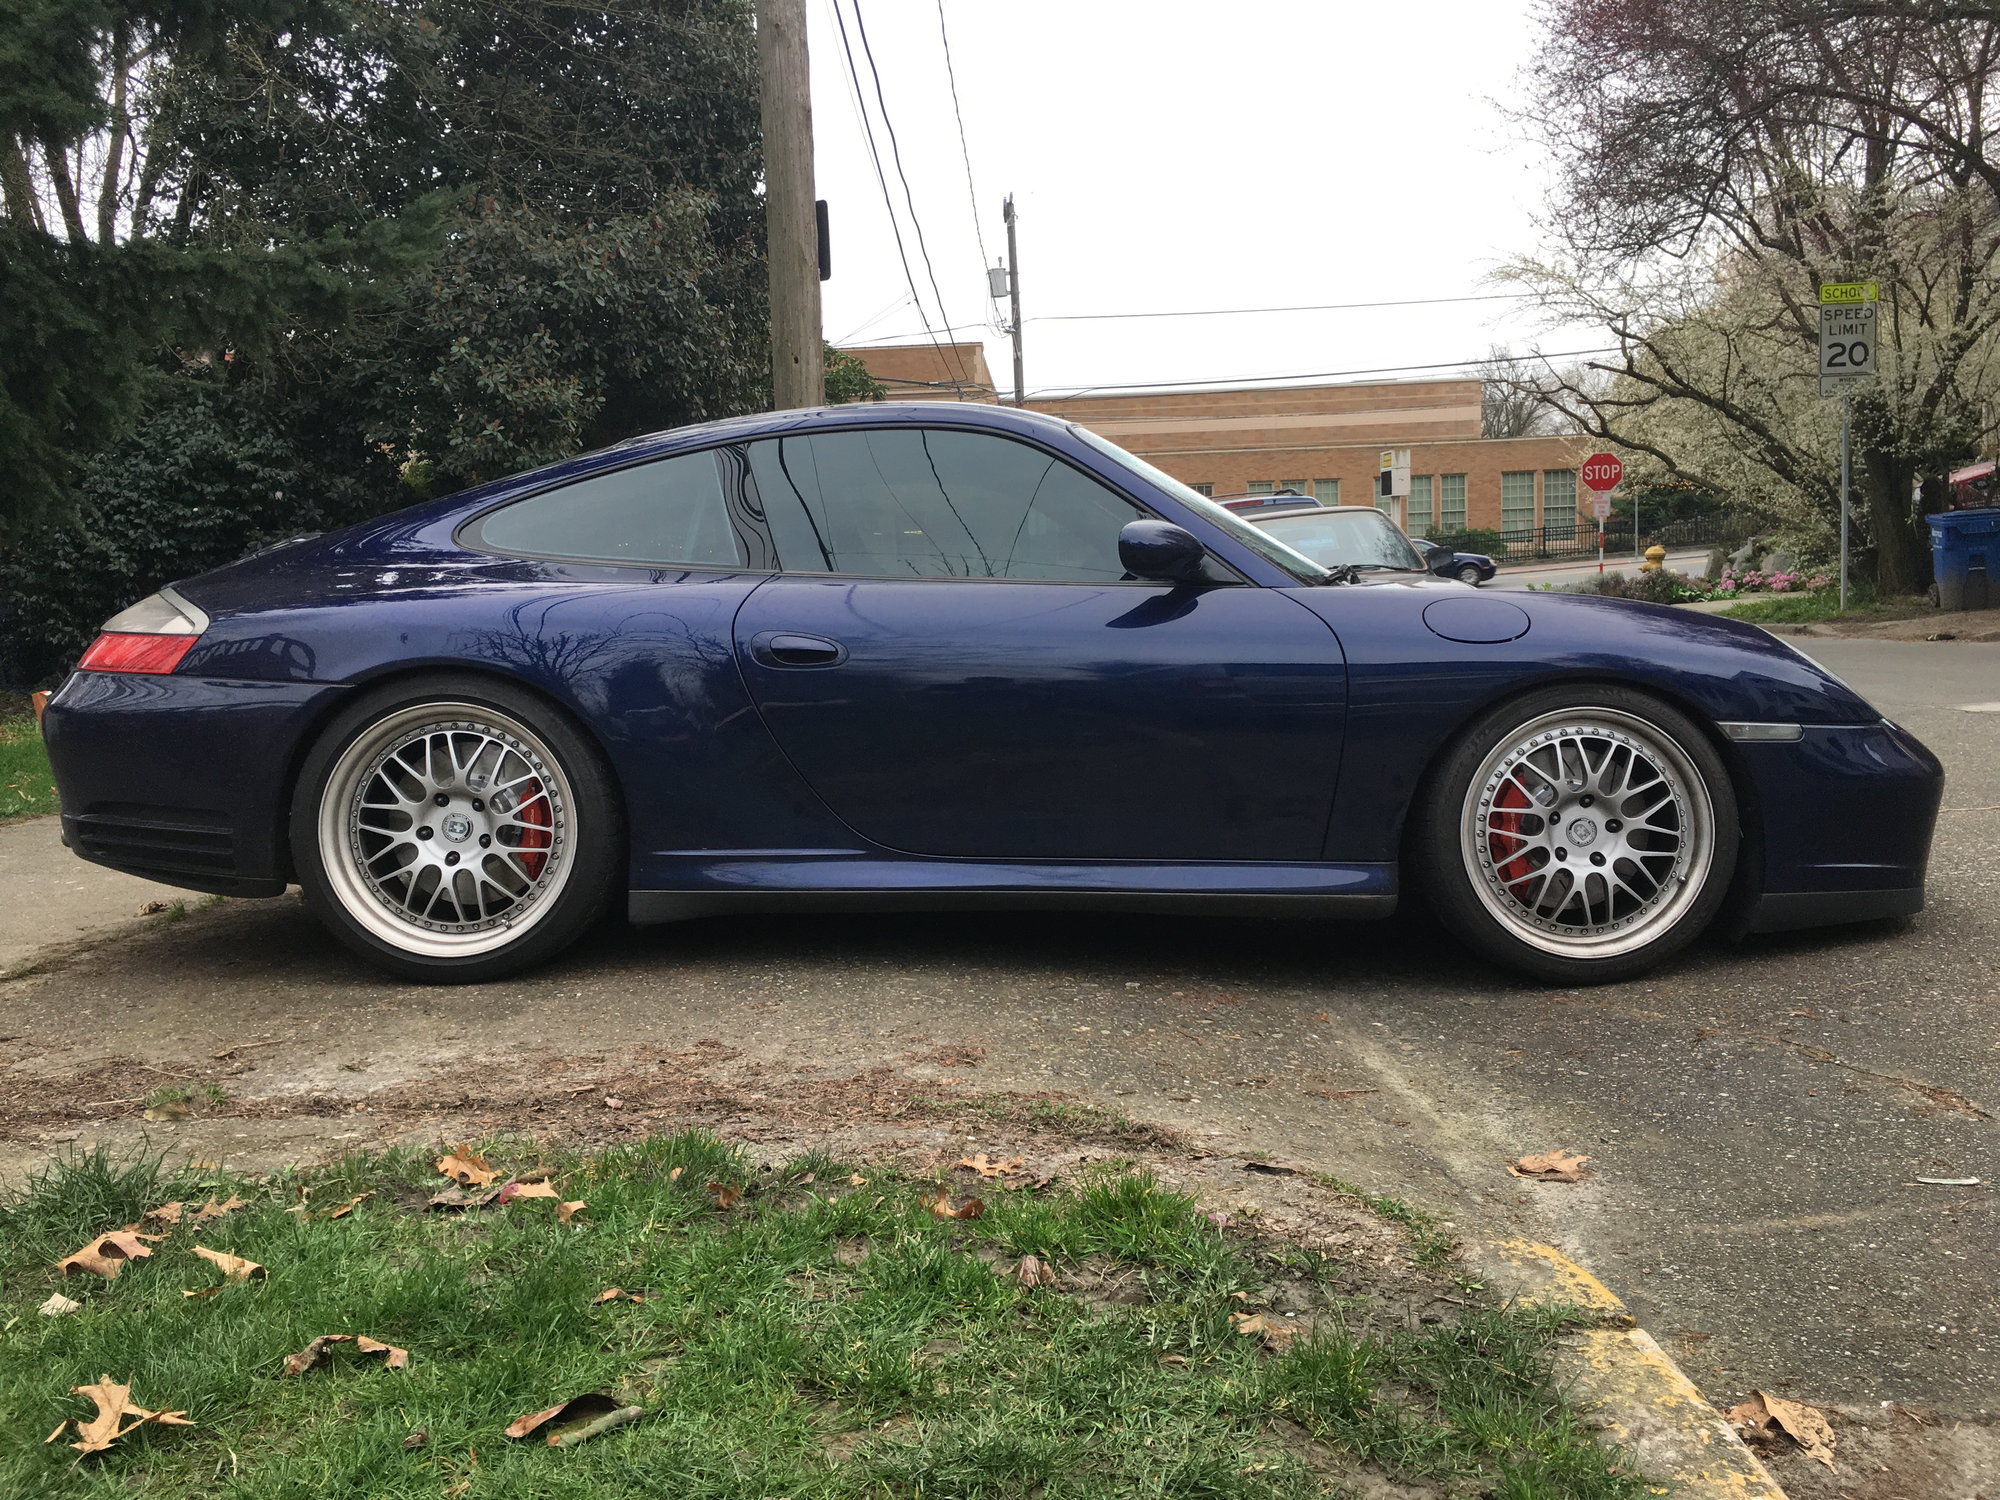 The Official HRE Wheels Photo Gallery for Porsche 996 - Page 2 